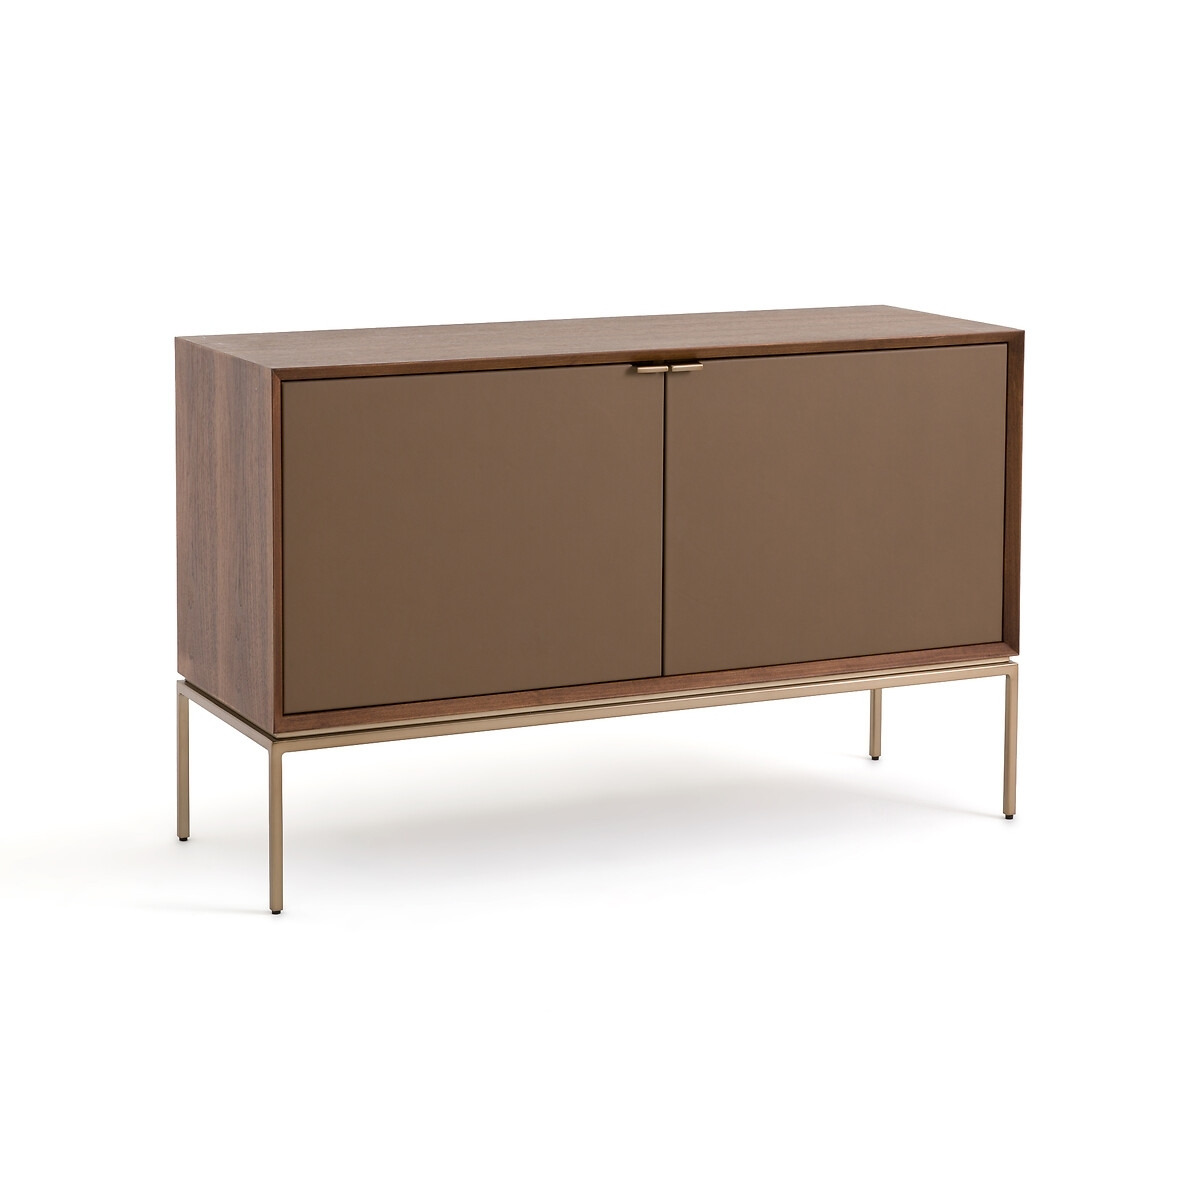 Delina Walnut and Leather XS Sideboard - image 1